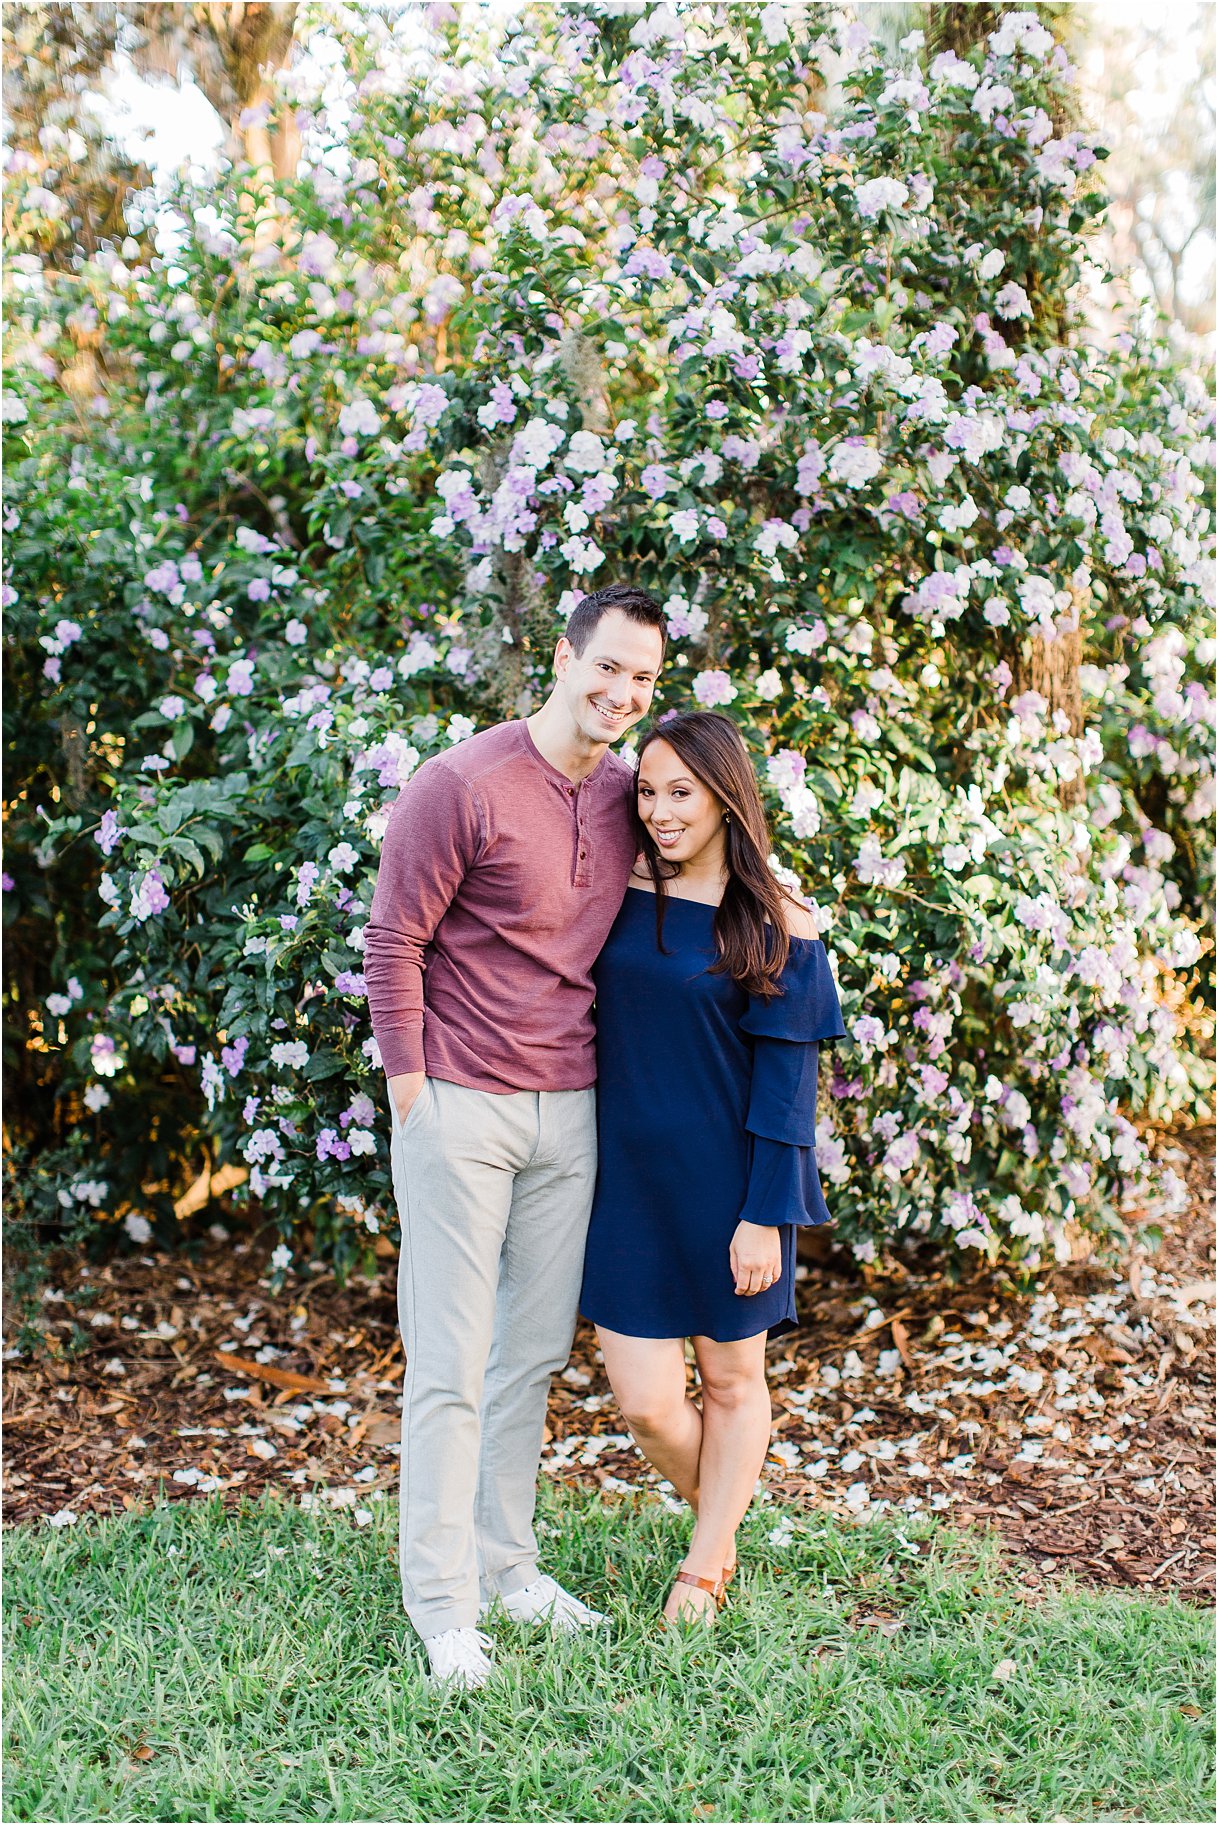 Bok Tower Engagement Session Fall Florida Tampa St Augustine DeLand Wedding Photographer7.jpg